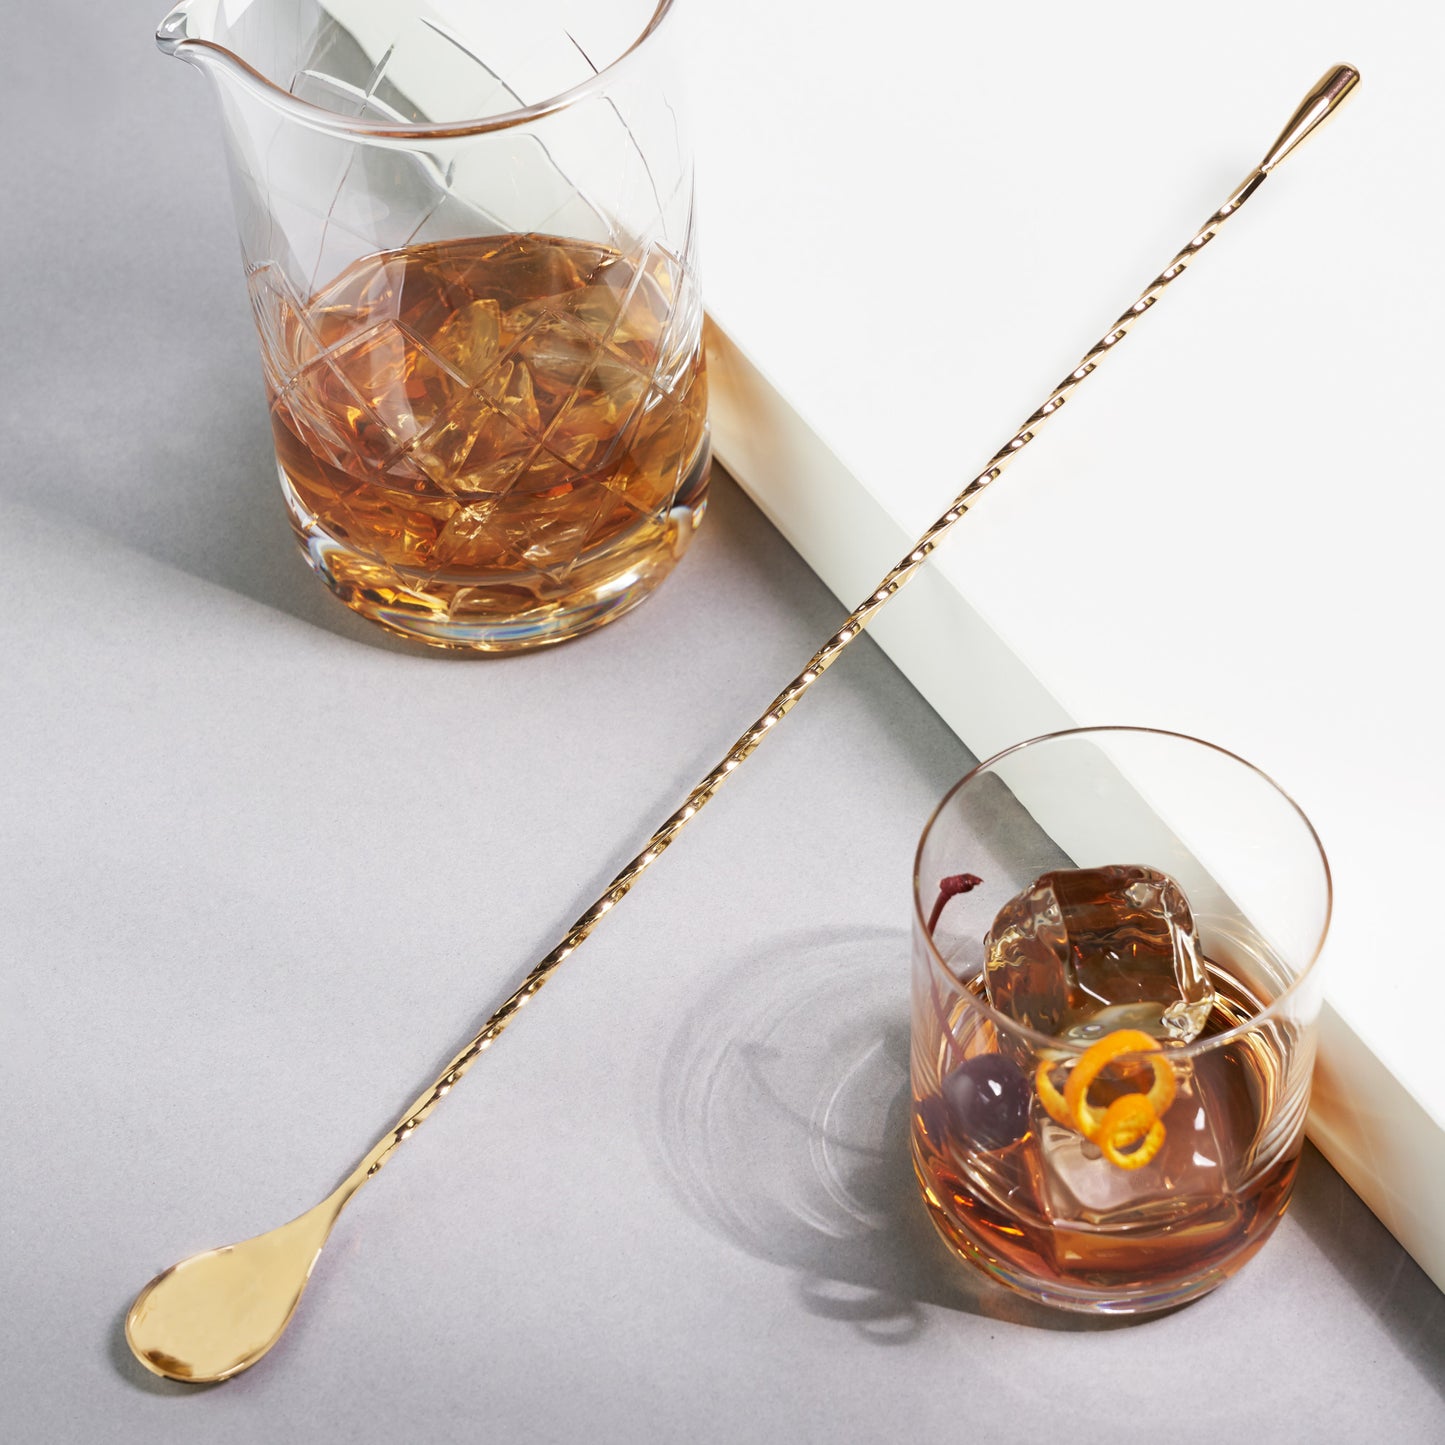 Weighted Bar Spoon - Gold